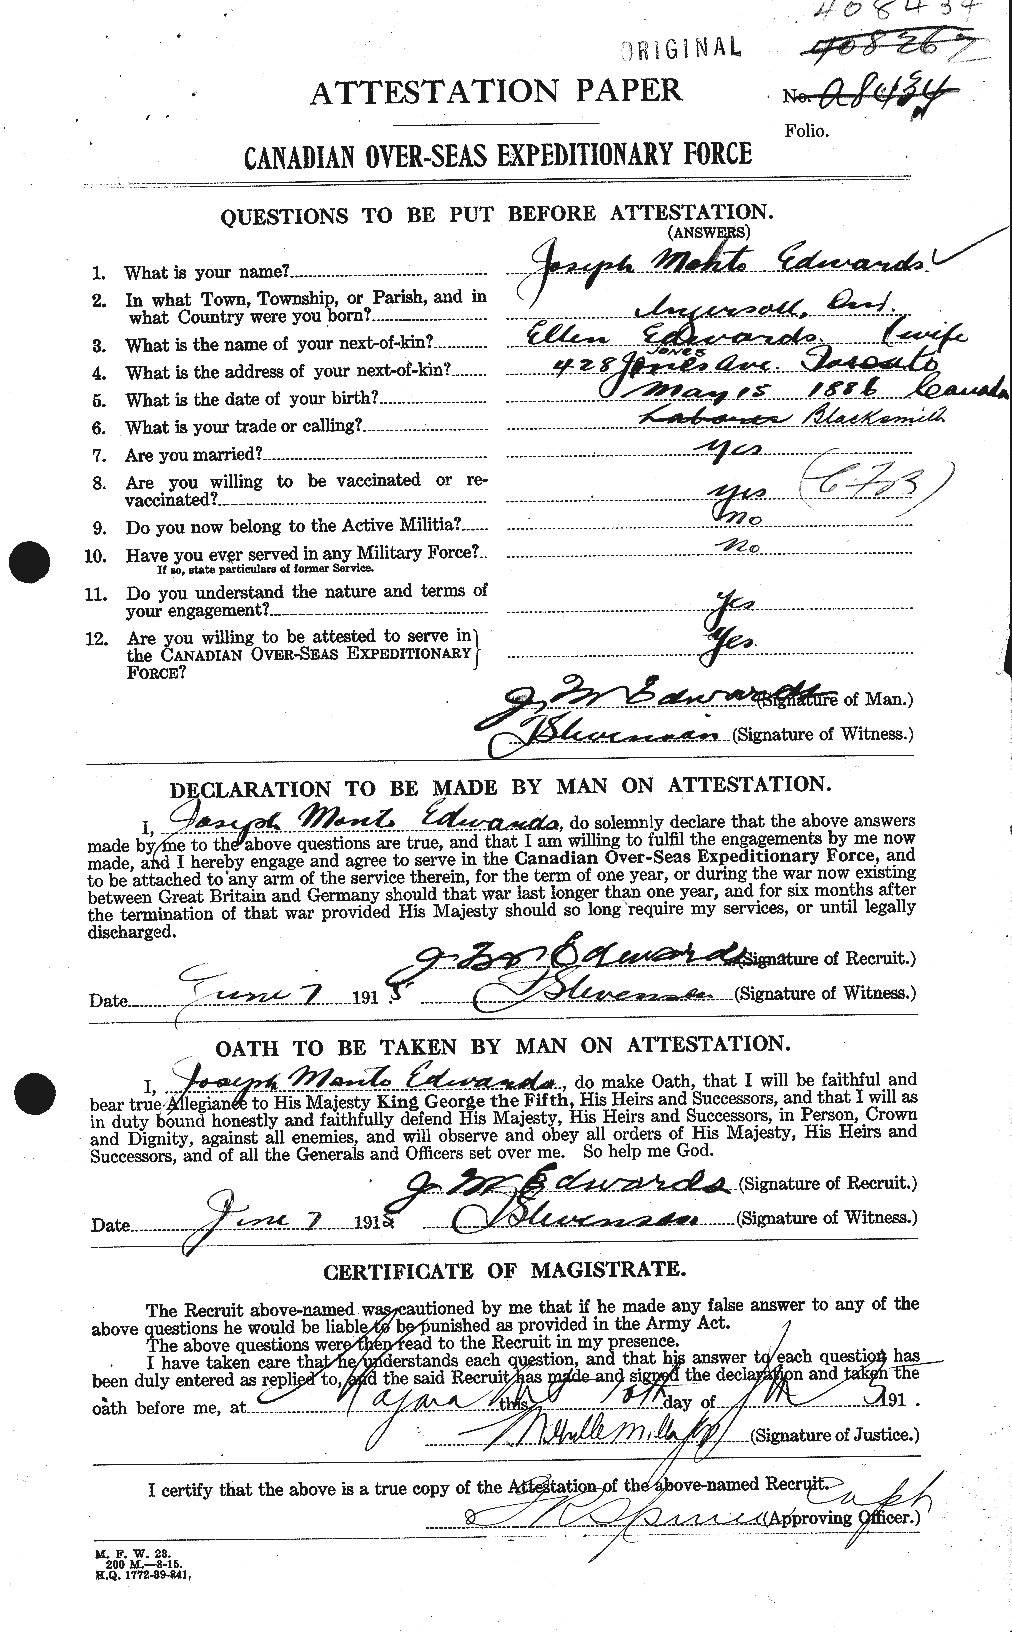 Personnel Records of the First World War - CEF 310182a